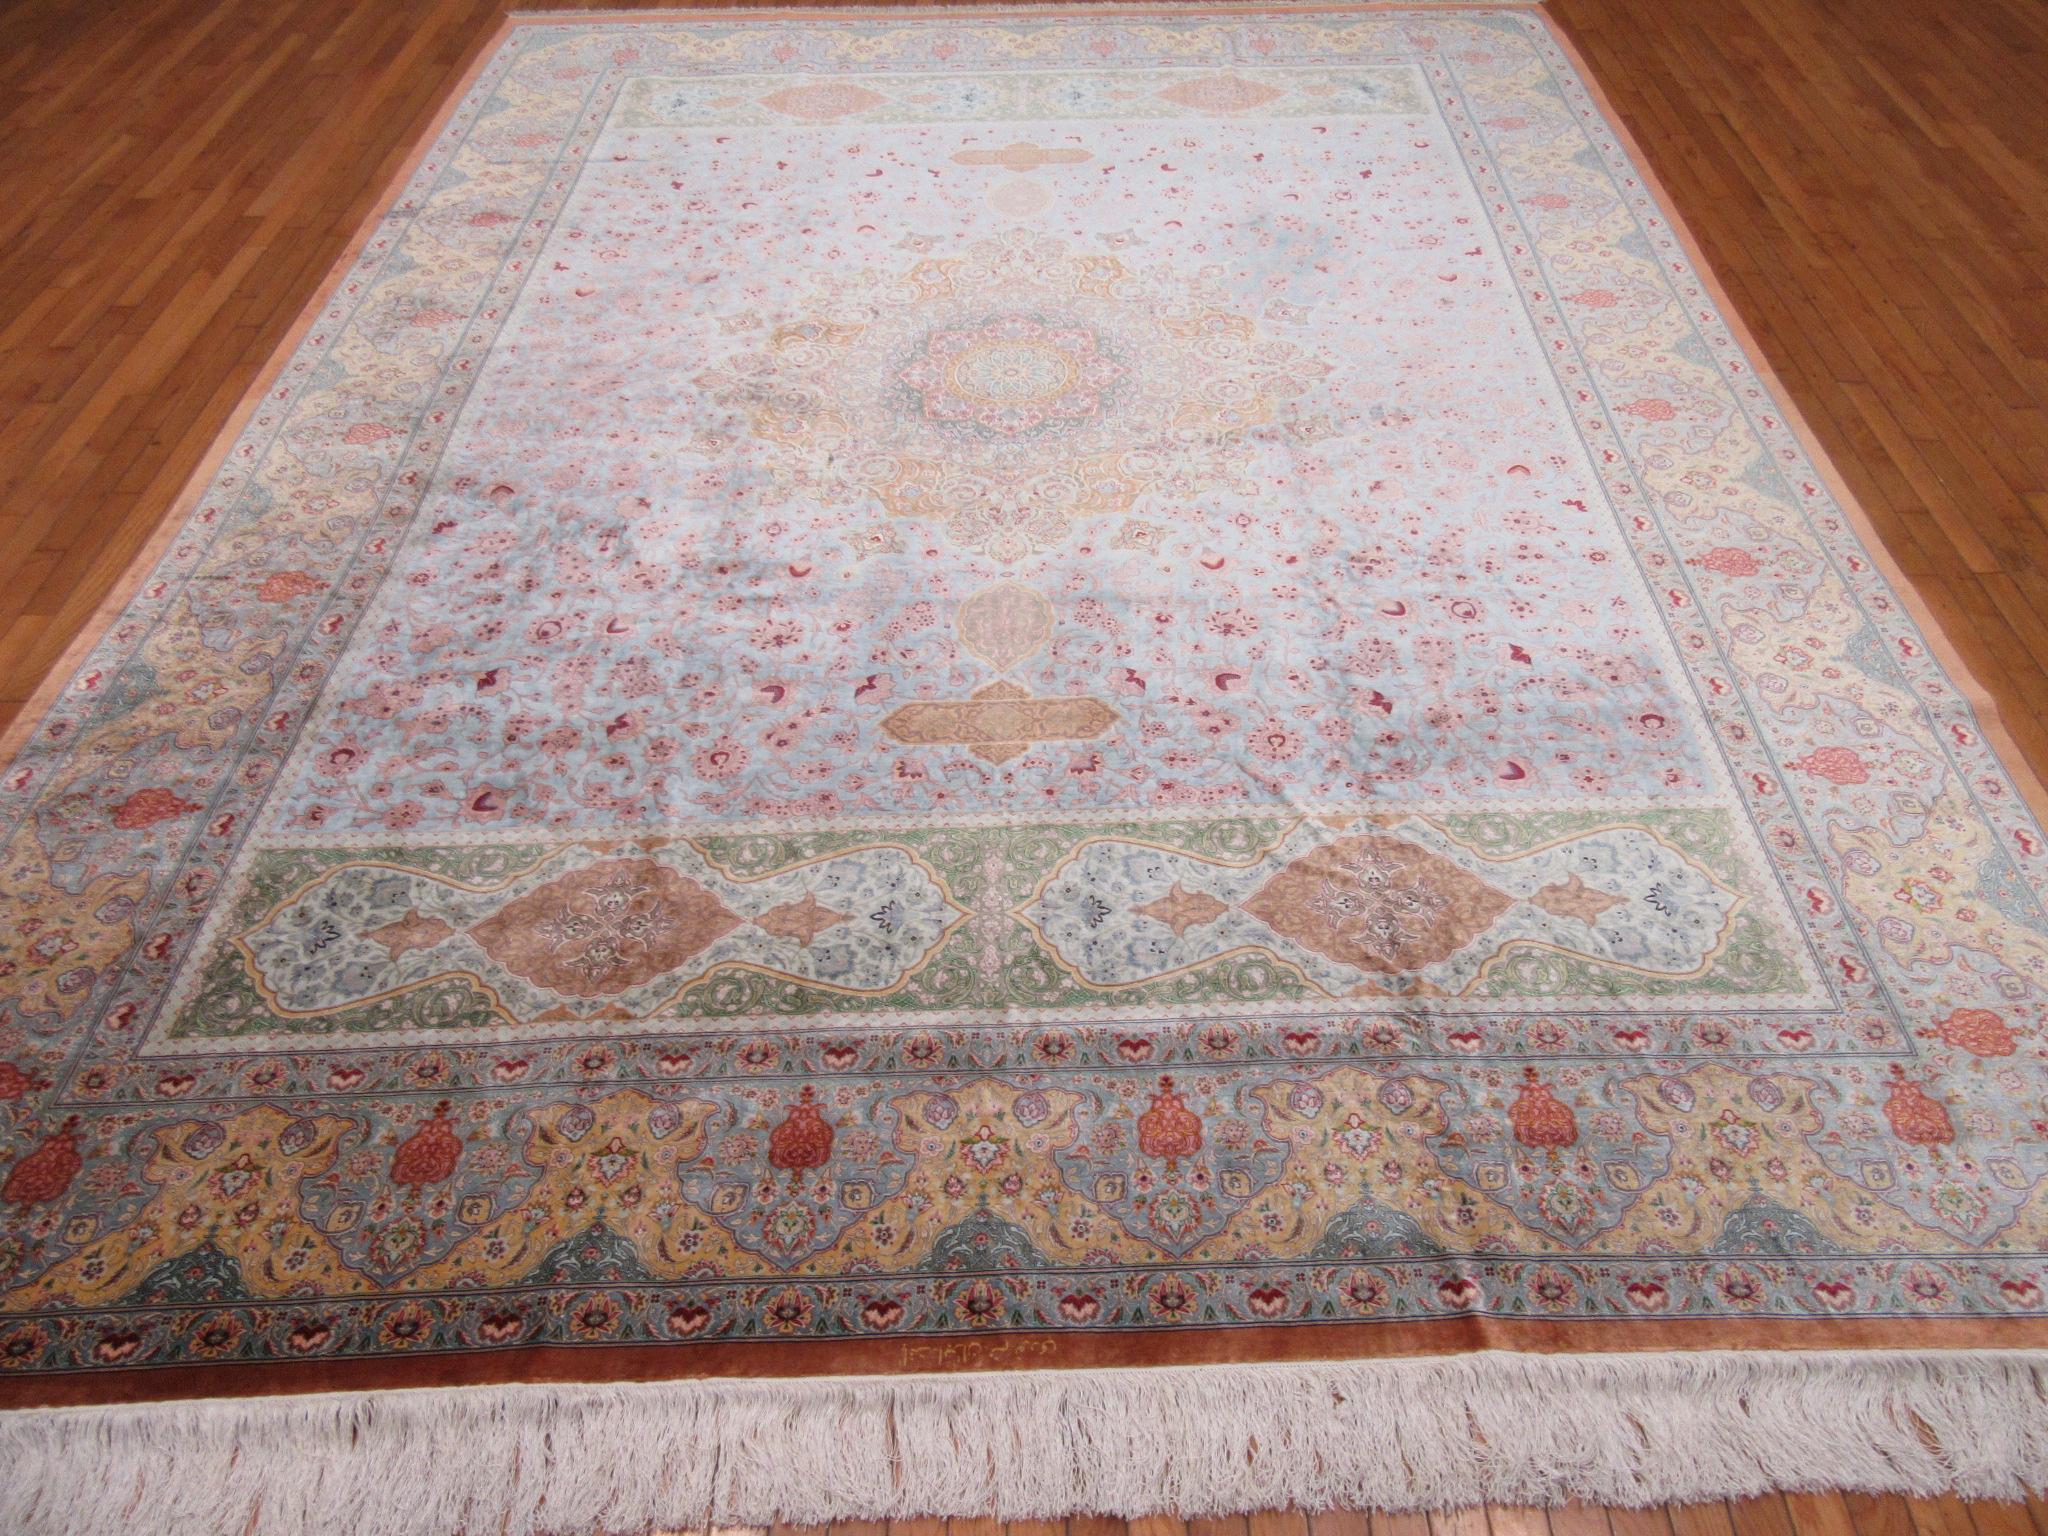 This is a very high density hand knotted pure silk rug from the infamous city of Qume in central Iran (Persian).
It has the classic intricate and detailed floral design executed in a roughly 900 knots per square inch weave.
The rug has medium